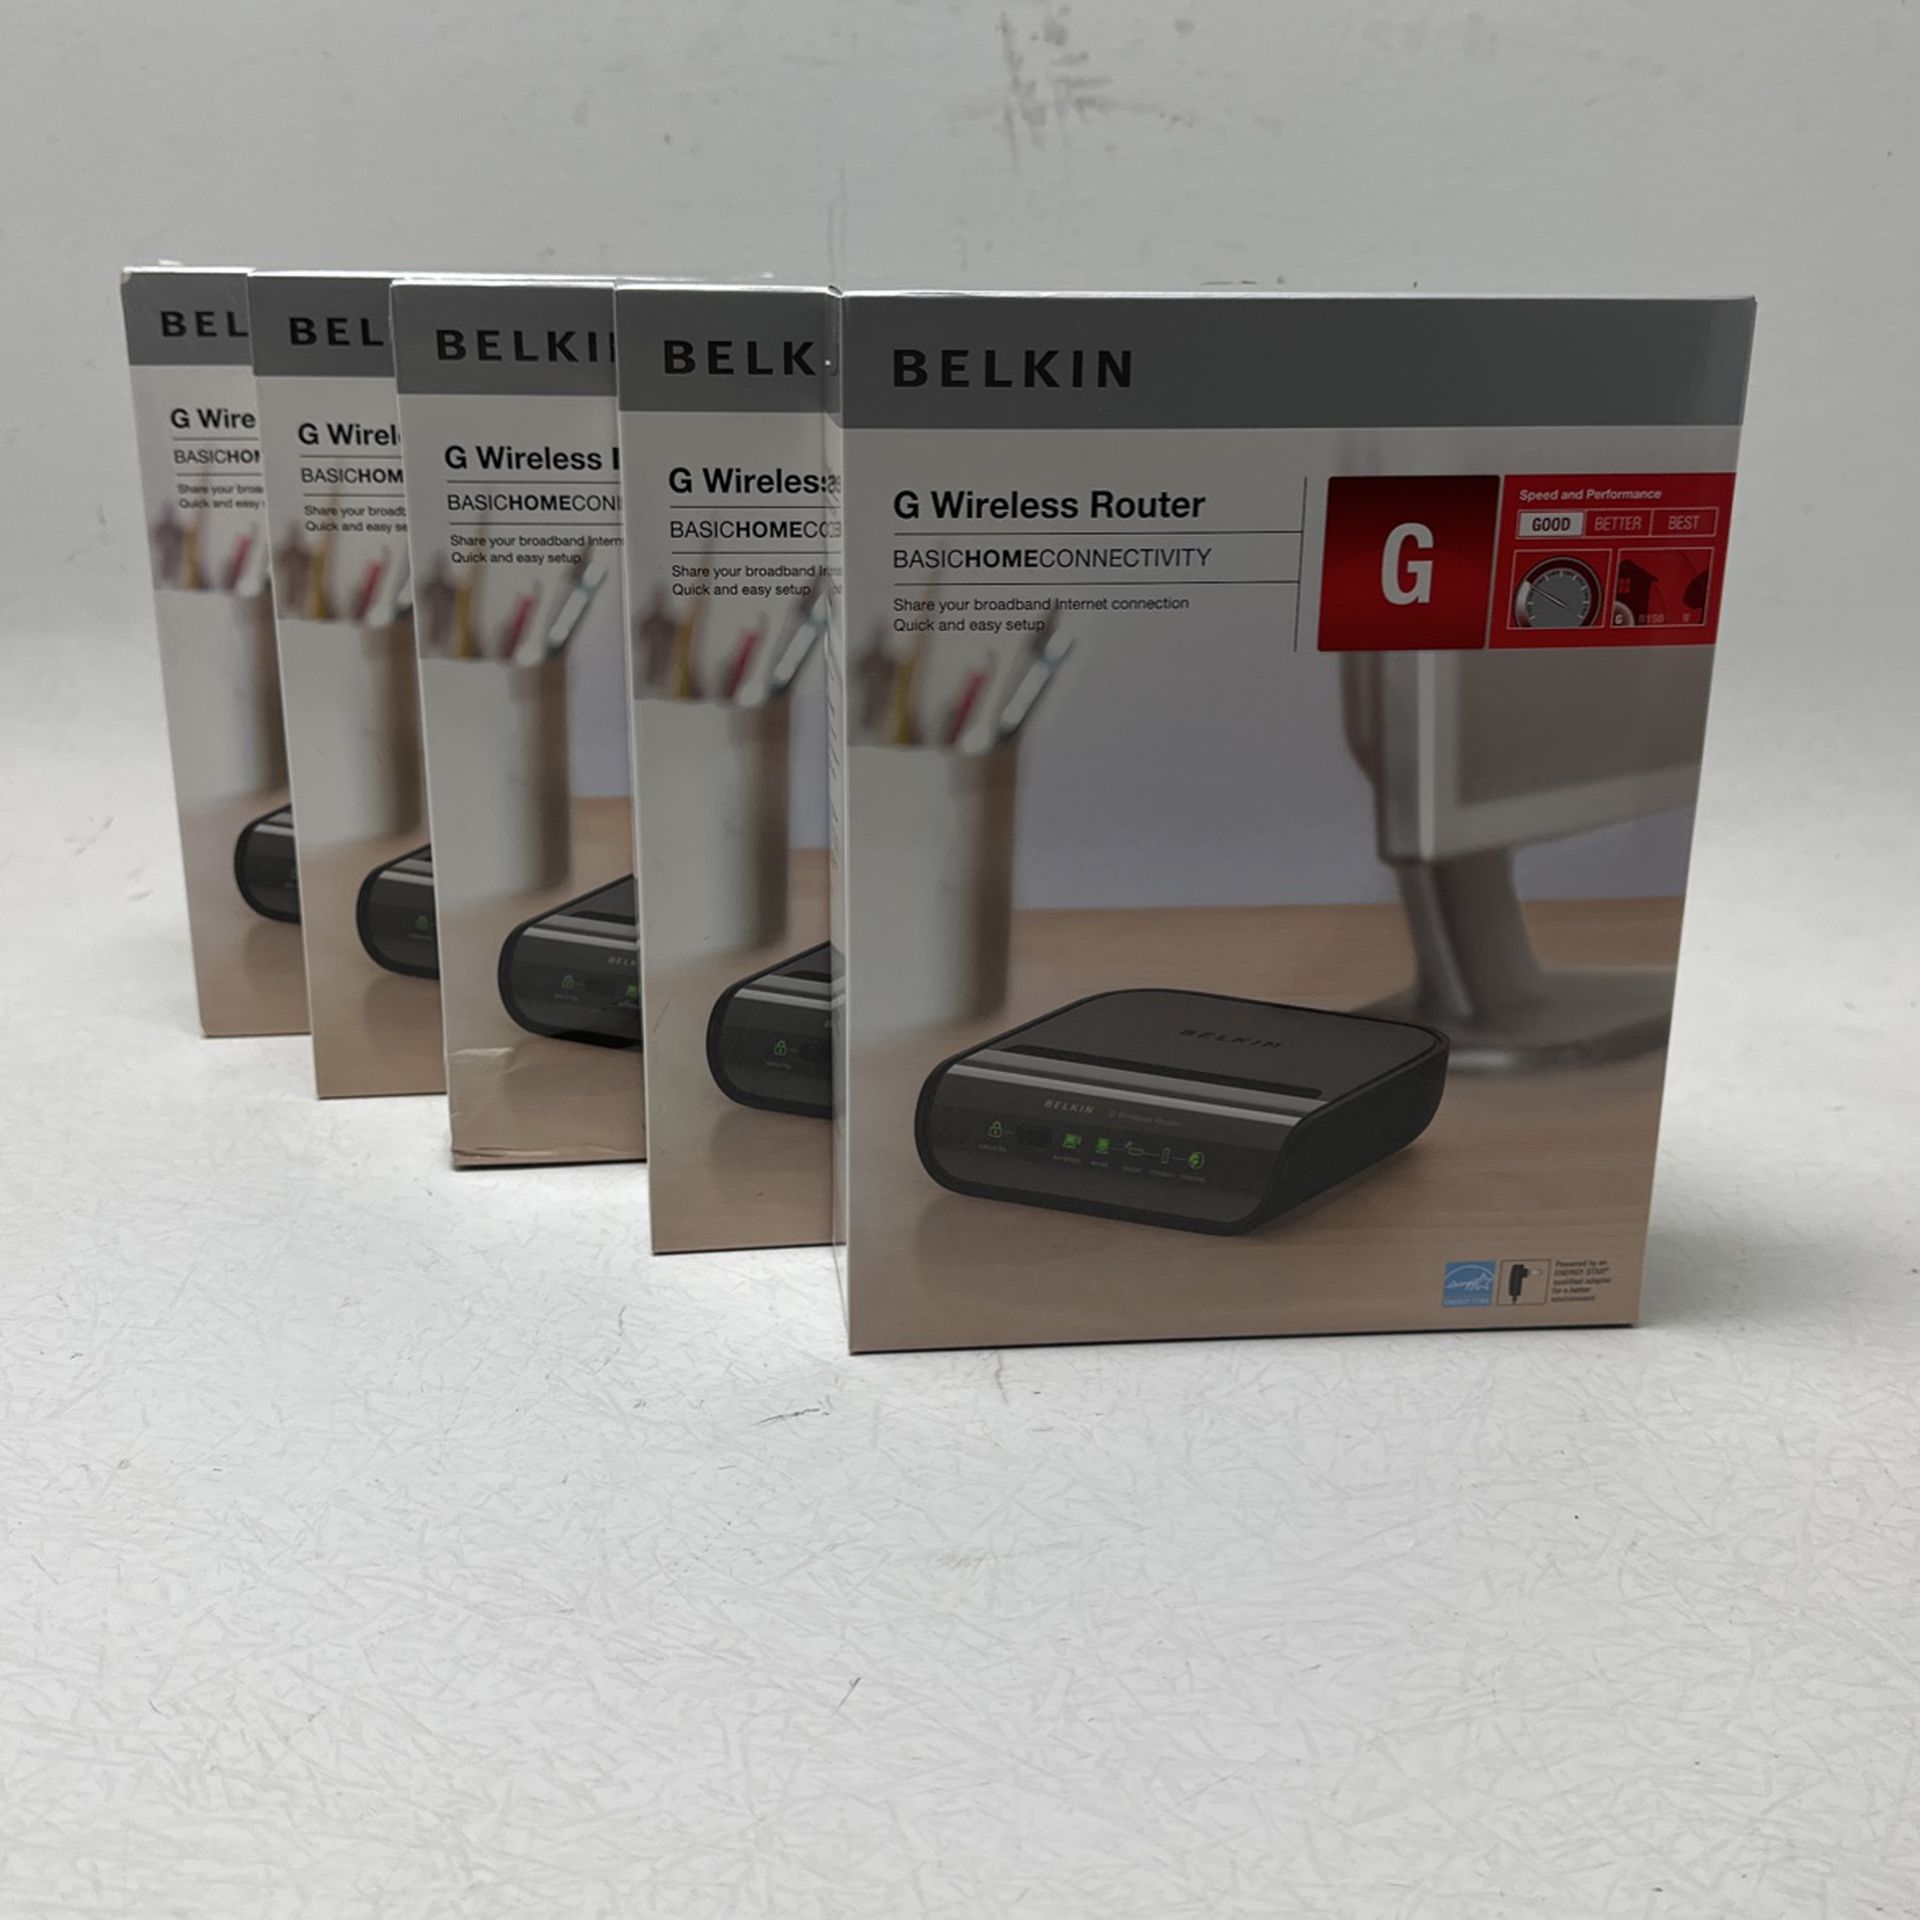 Belkin G Wireless Router F5D7234-4 Lot Of 5 Or individual 